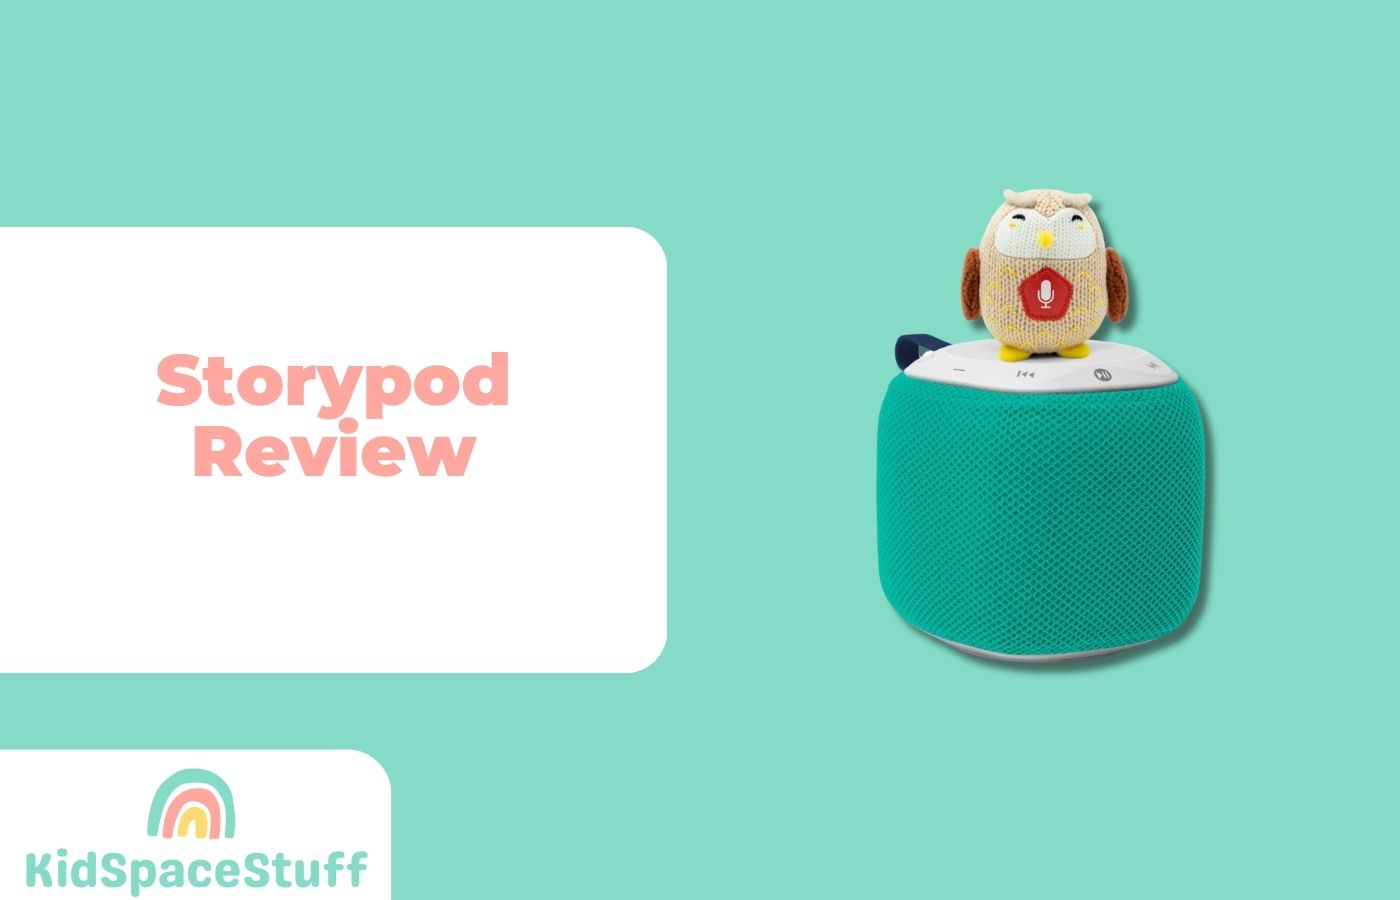 Storypod Review: Is It Worth The Money? (2023 Review)